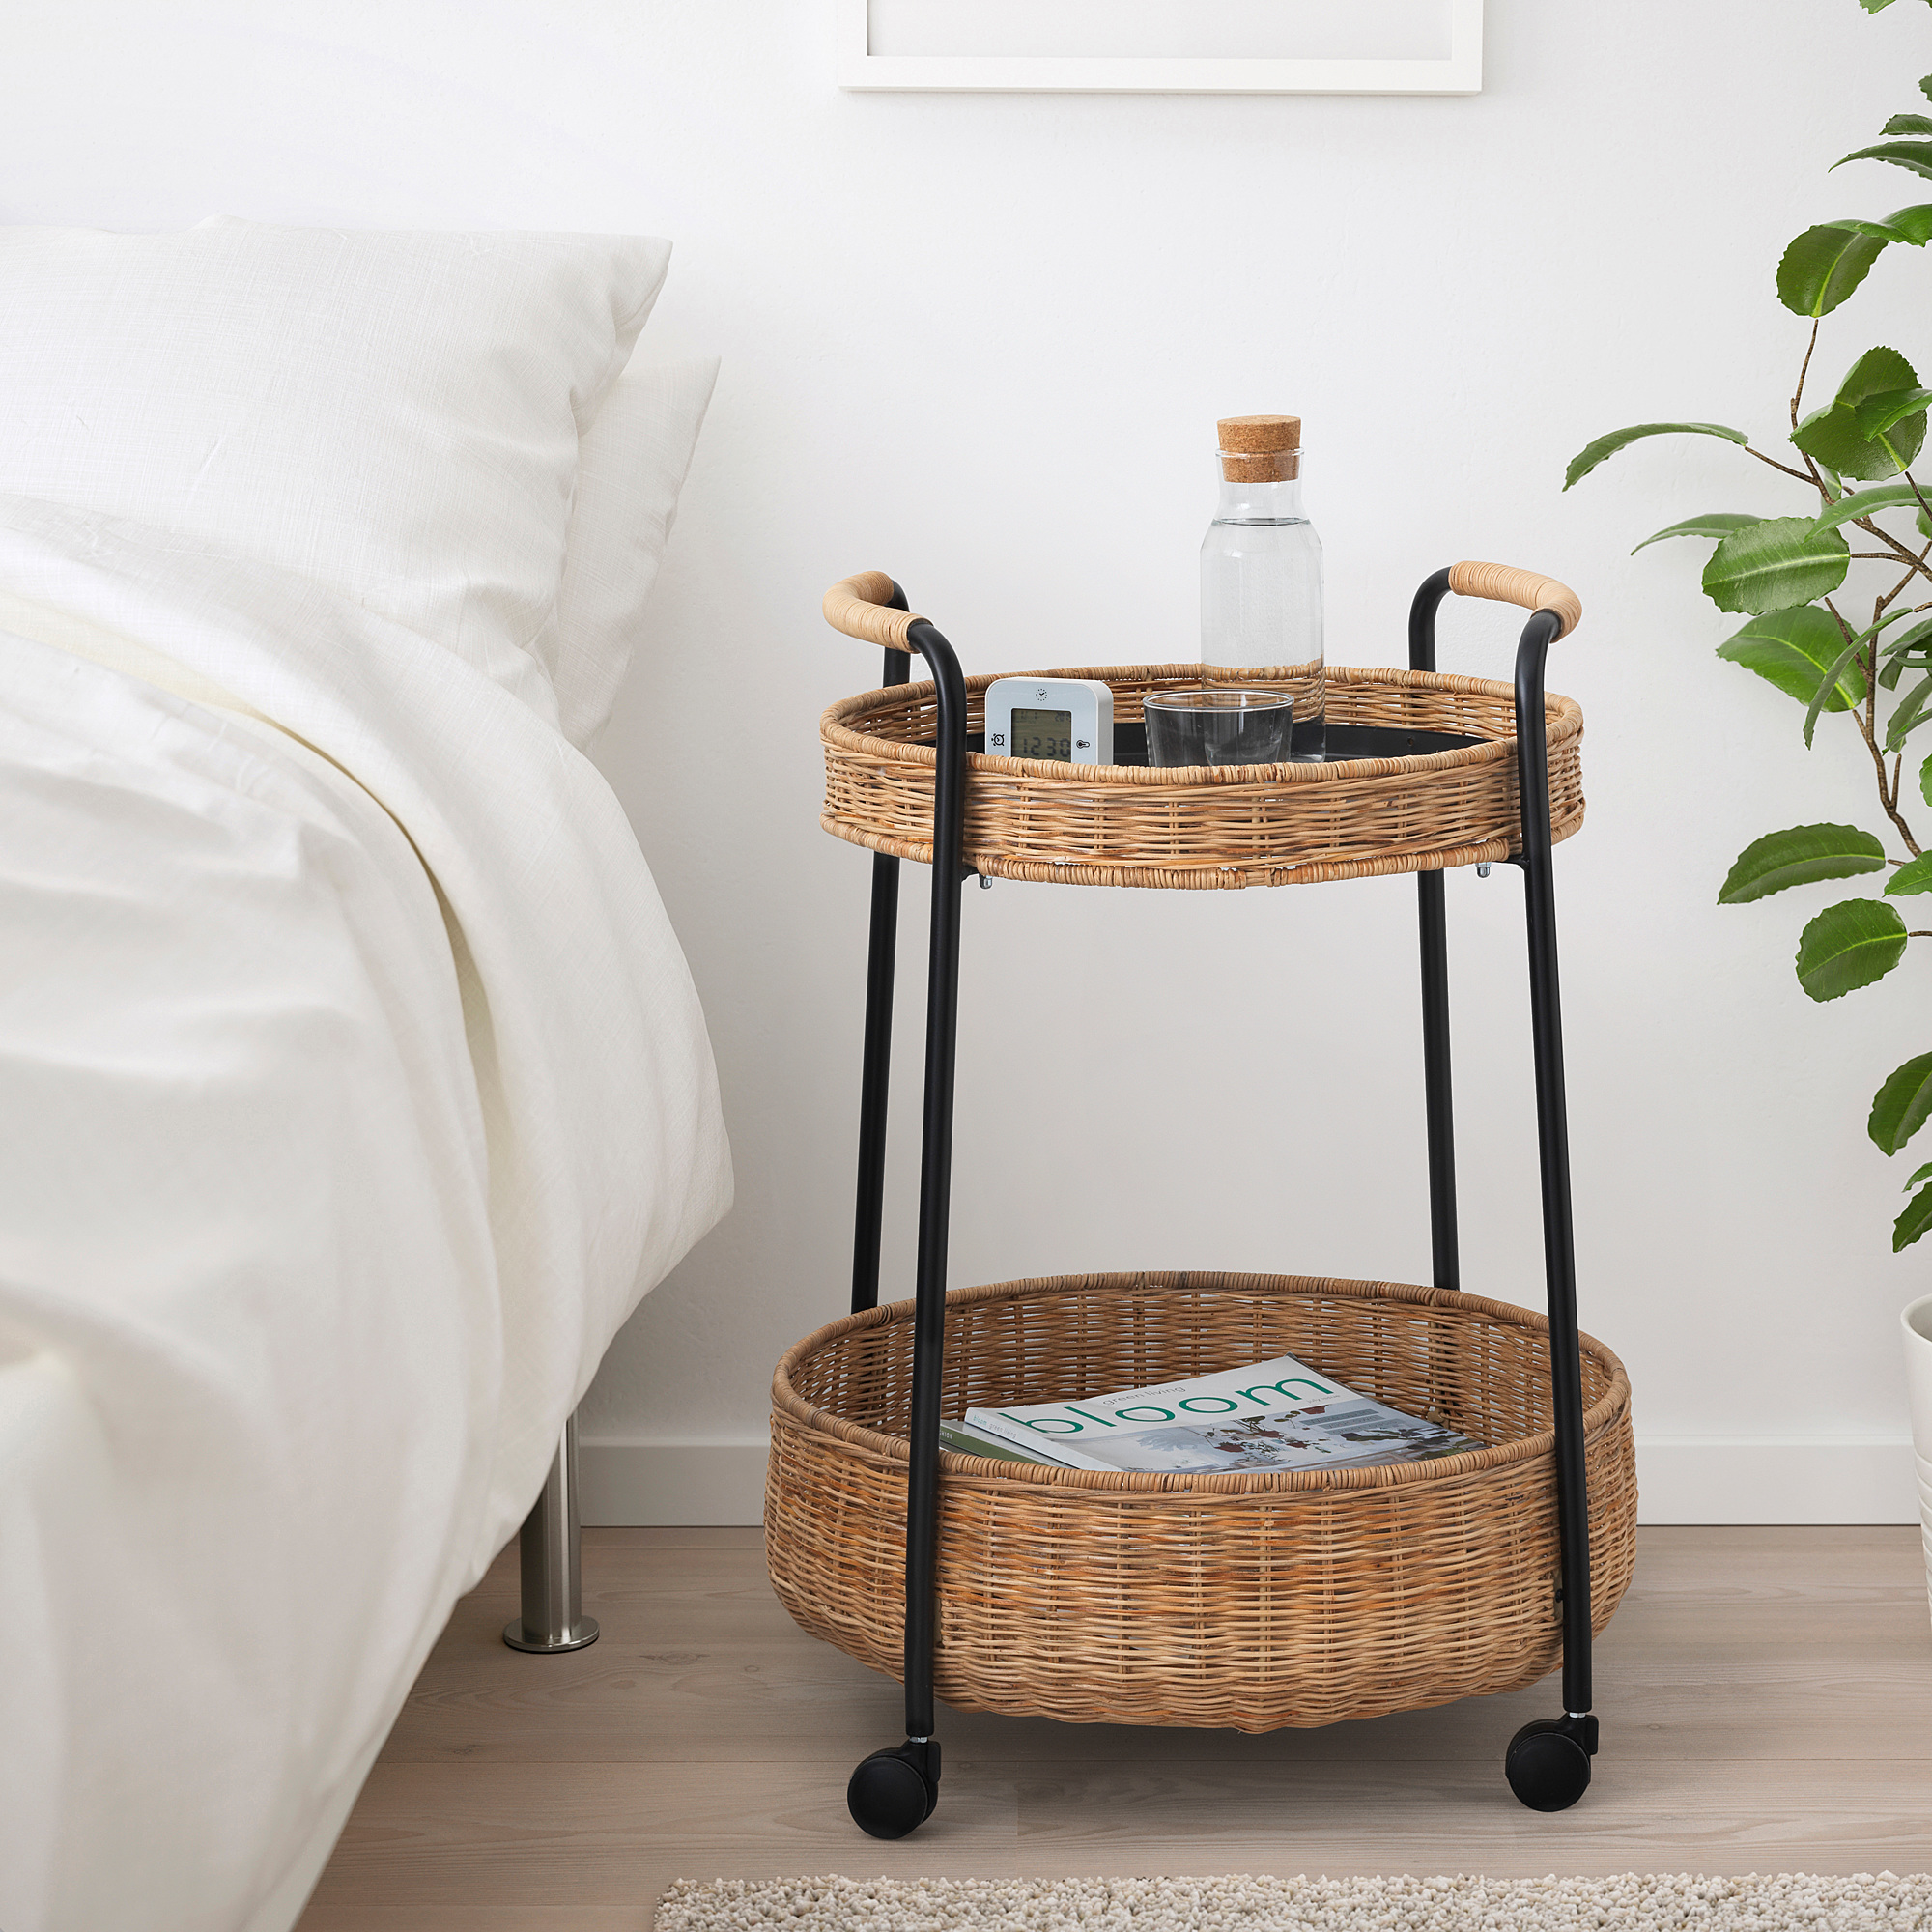 LUBBAN trolley table with storage